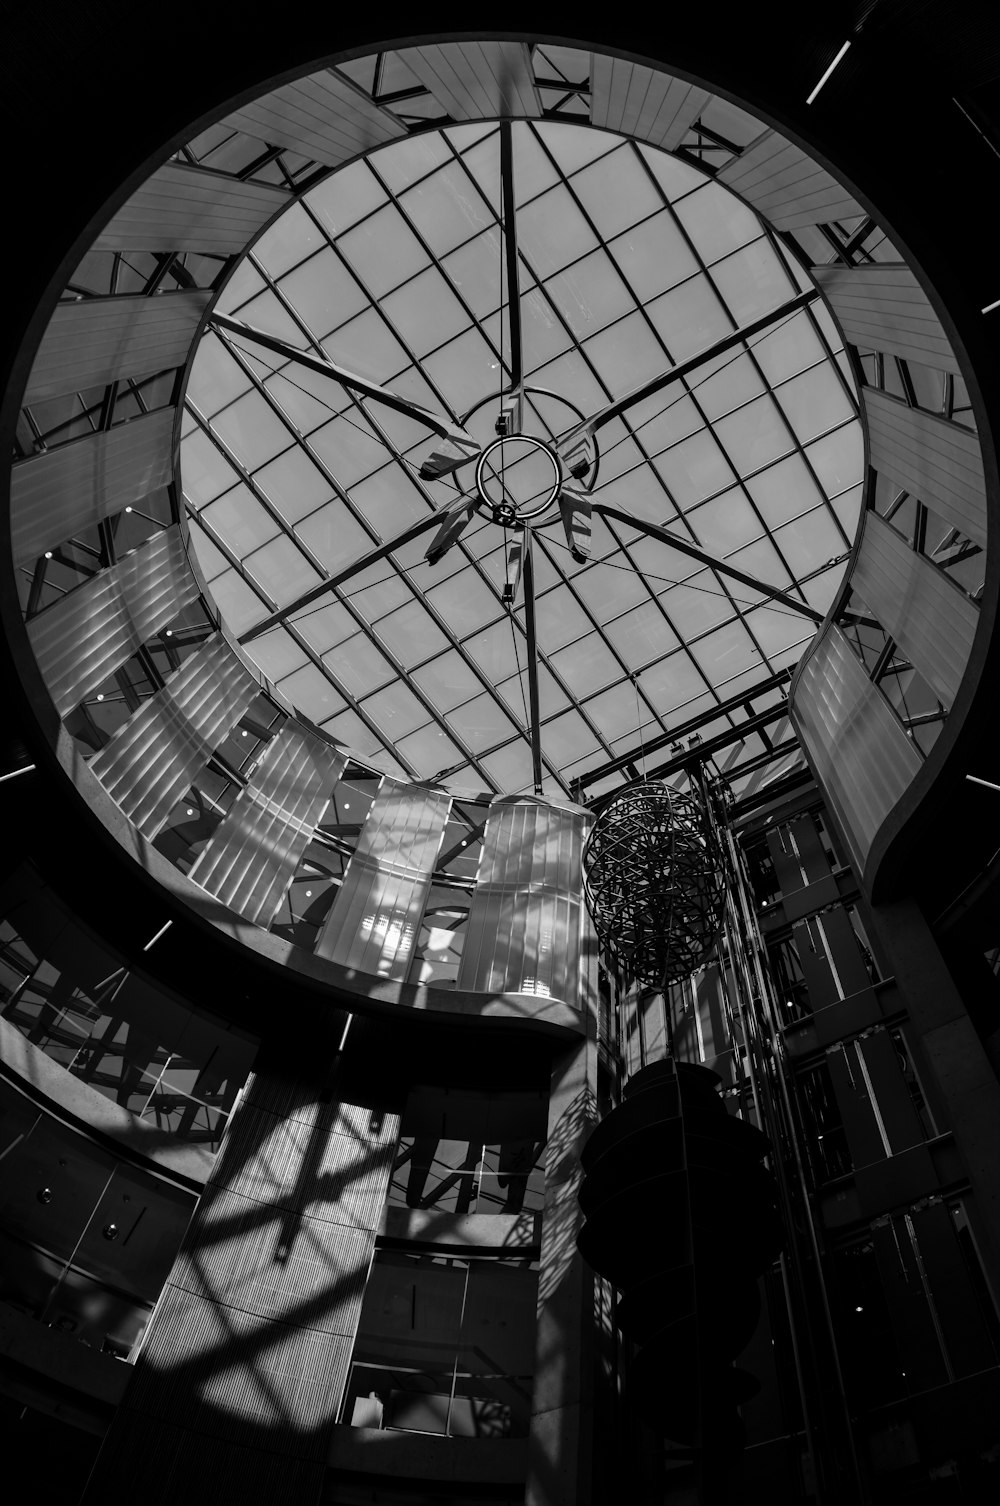 a large clock mounted to the ceiling of a building